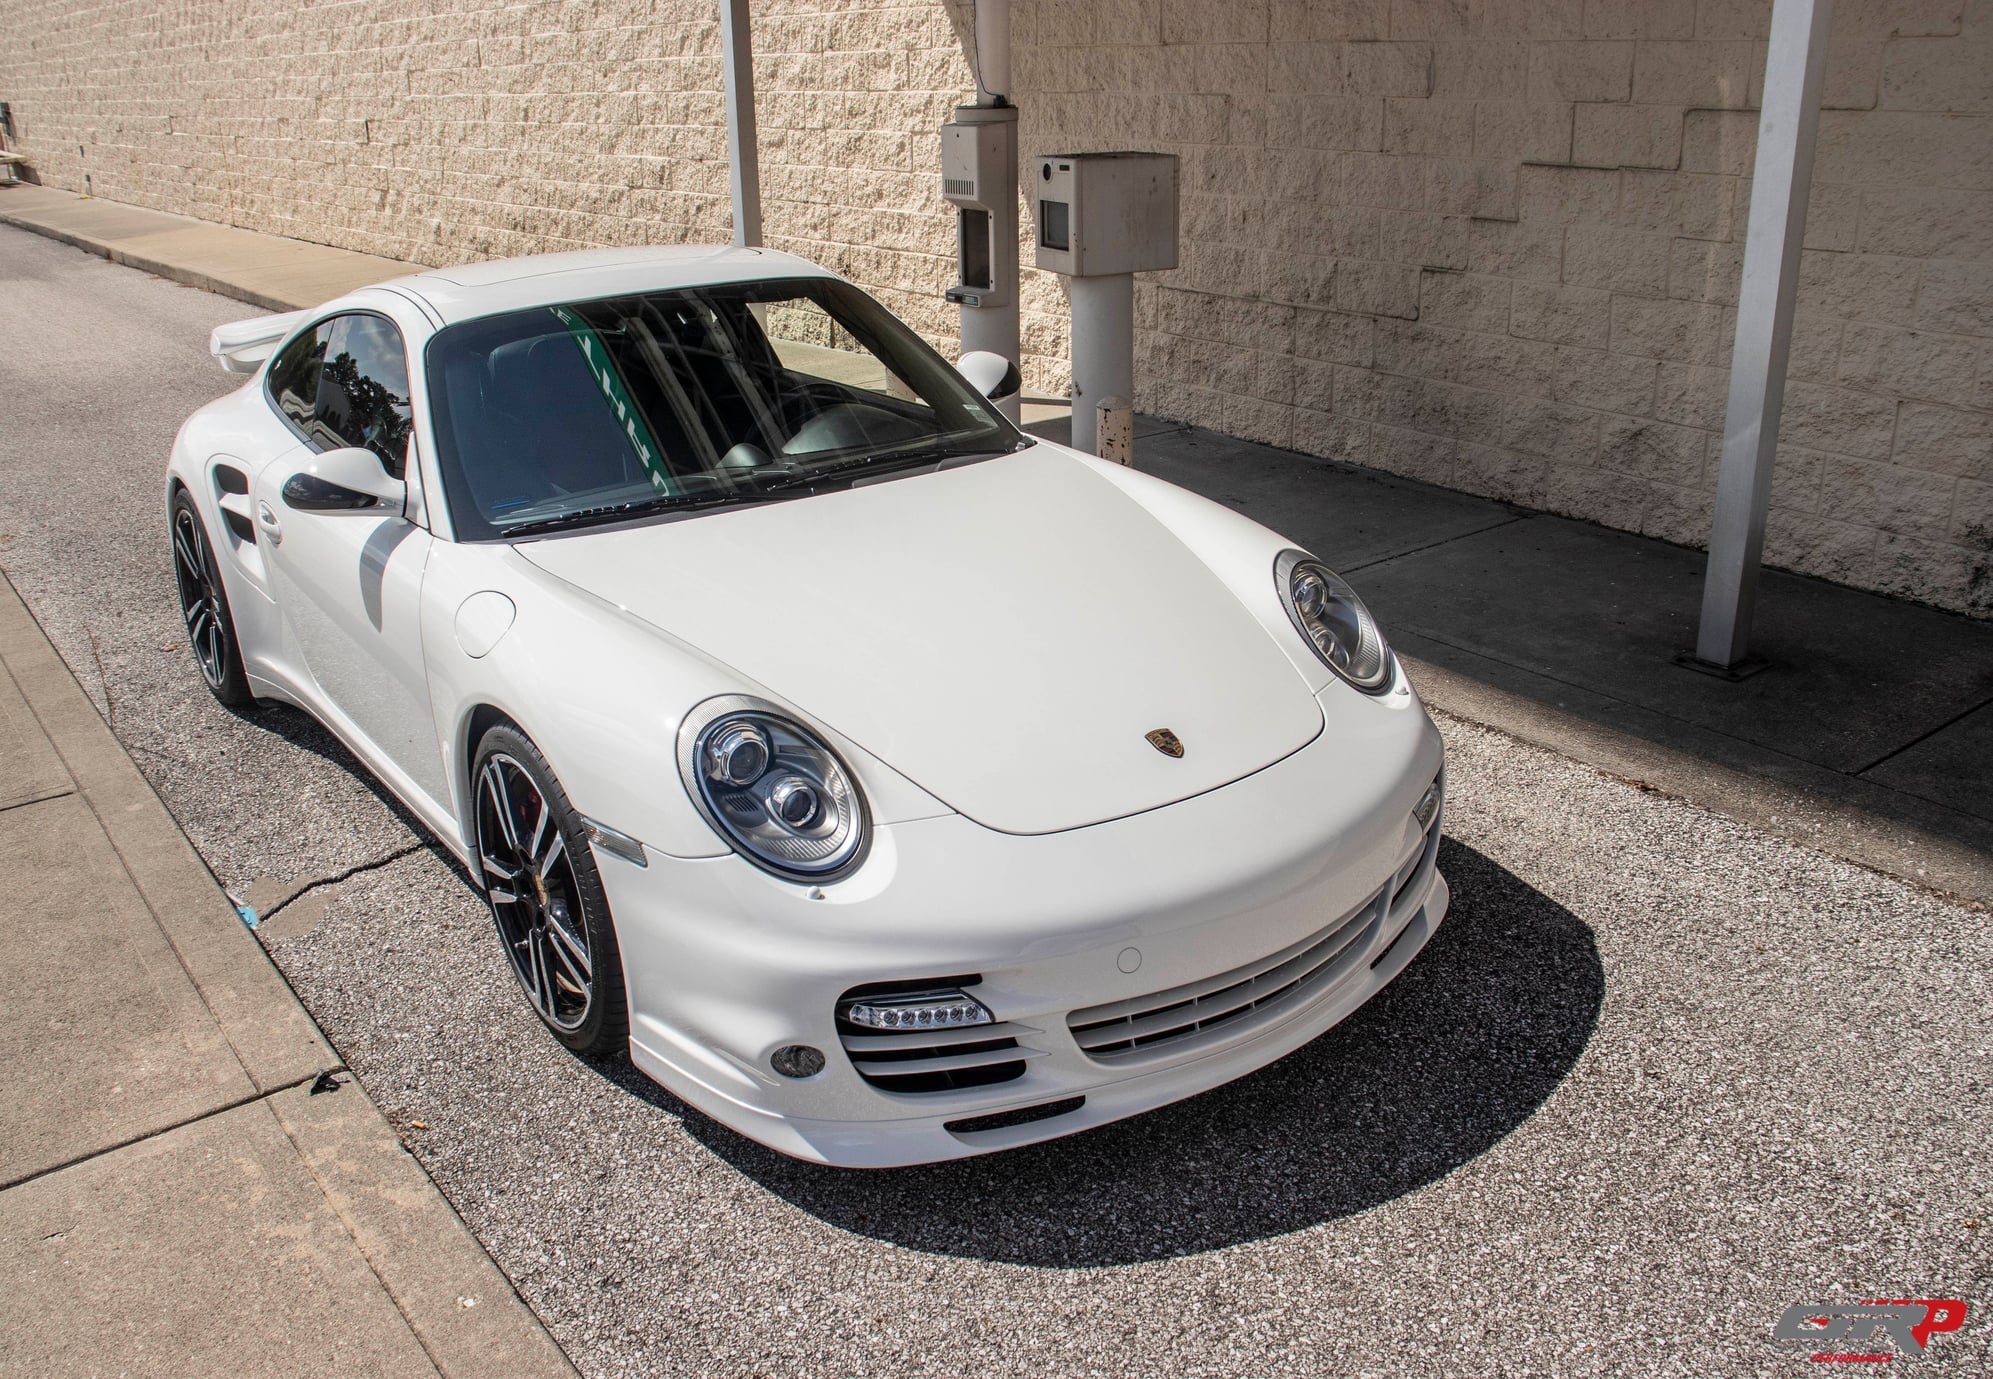 2011 Porsche 911 - 2011 Porsche 911 Turbo - Factory Aero Kit - Used - VIN WP0AD2A92BS766658 - 13,313 Miles - 6 cyl - AWD - Automatic - Coupe - White - Brownsburg, IN 46112, United States